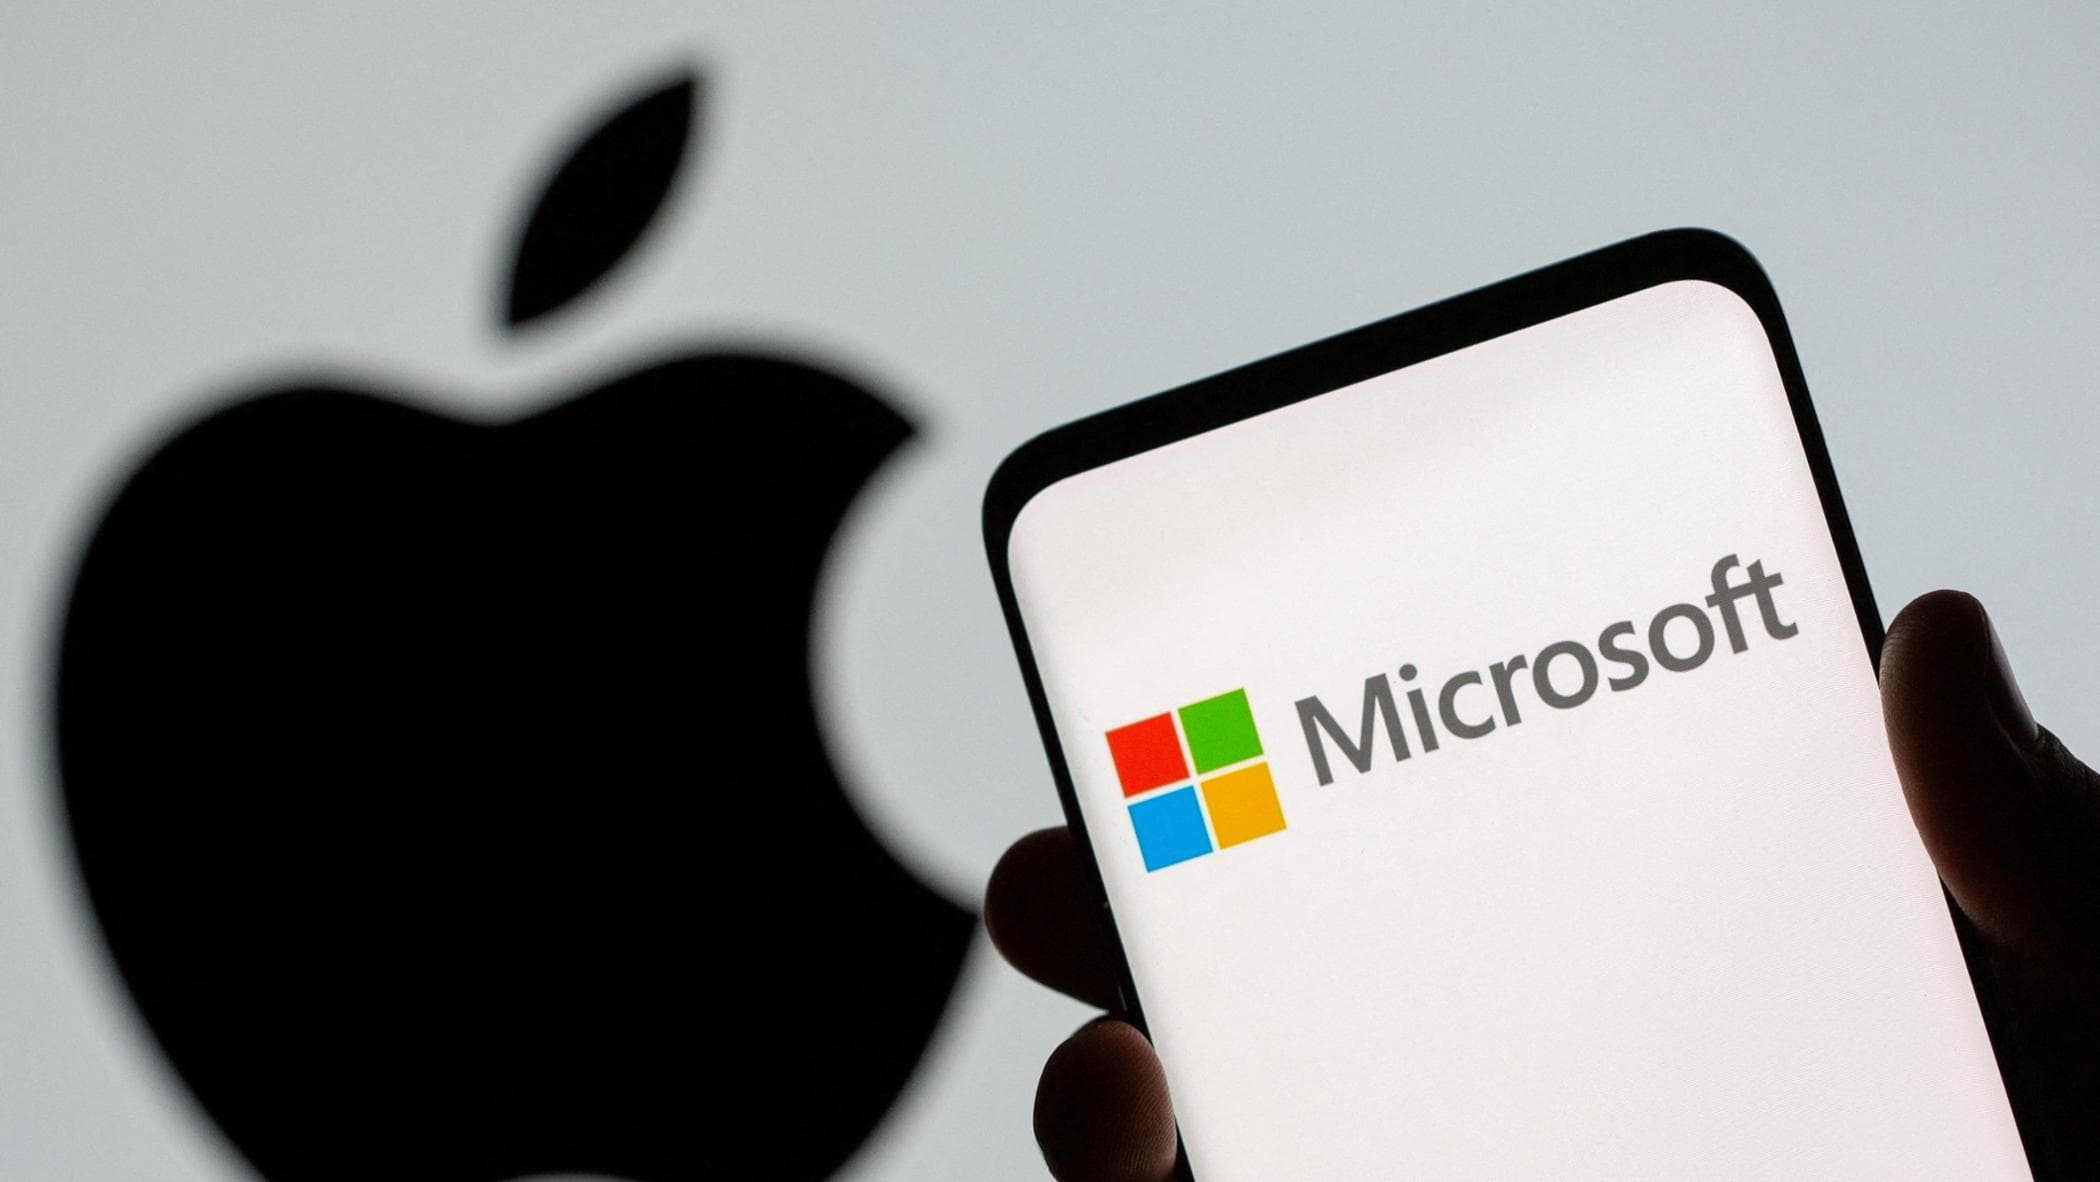 Microsoft beats Apple: the world's most valuable company is back